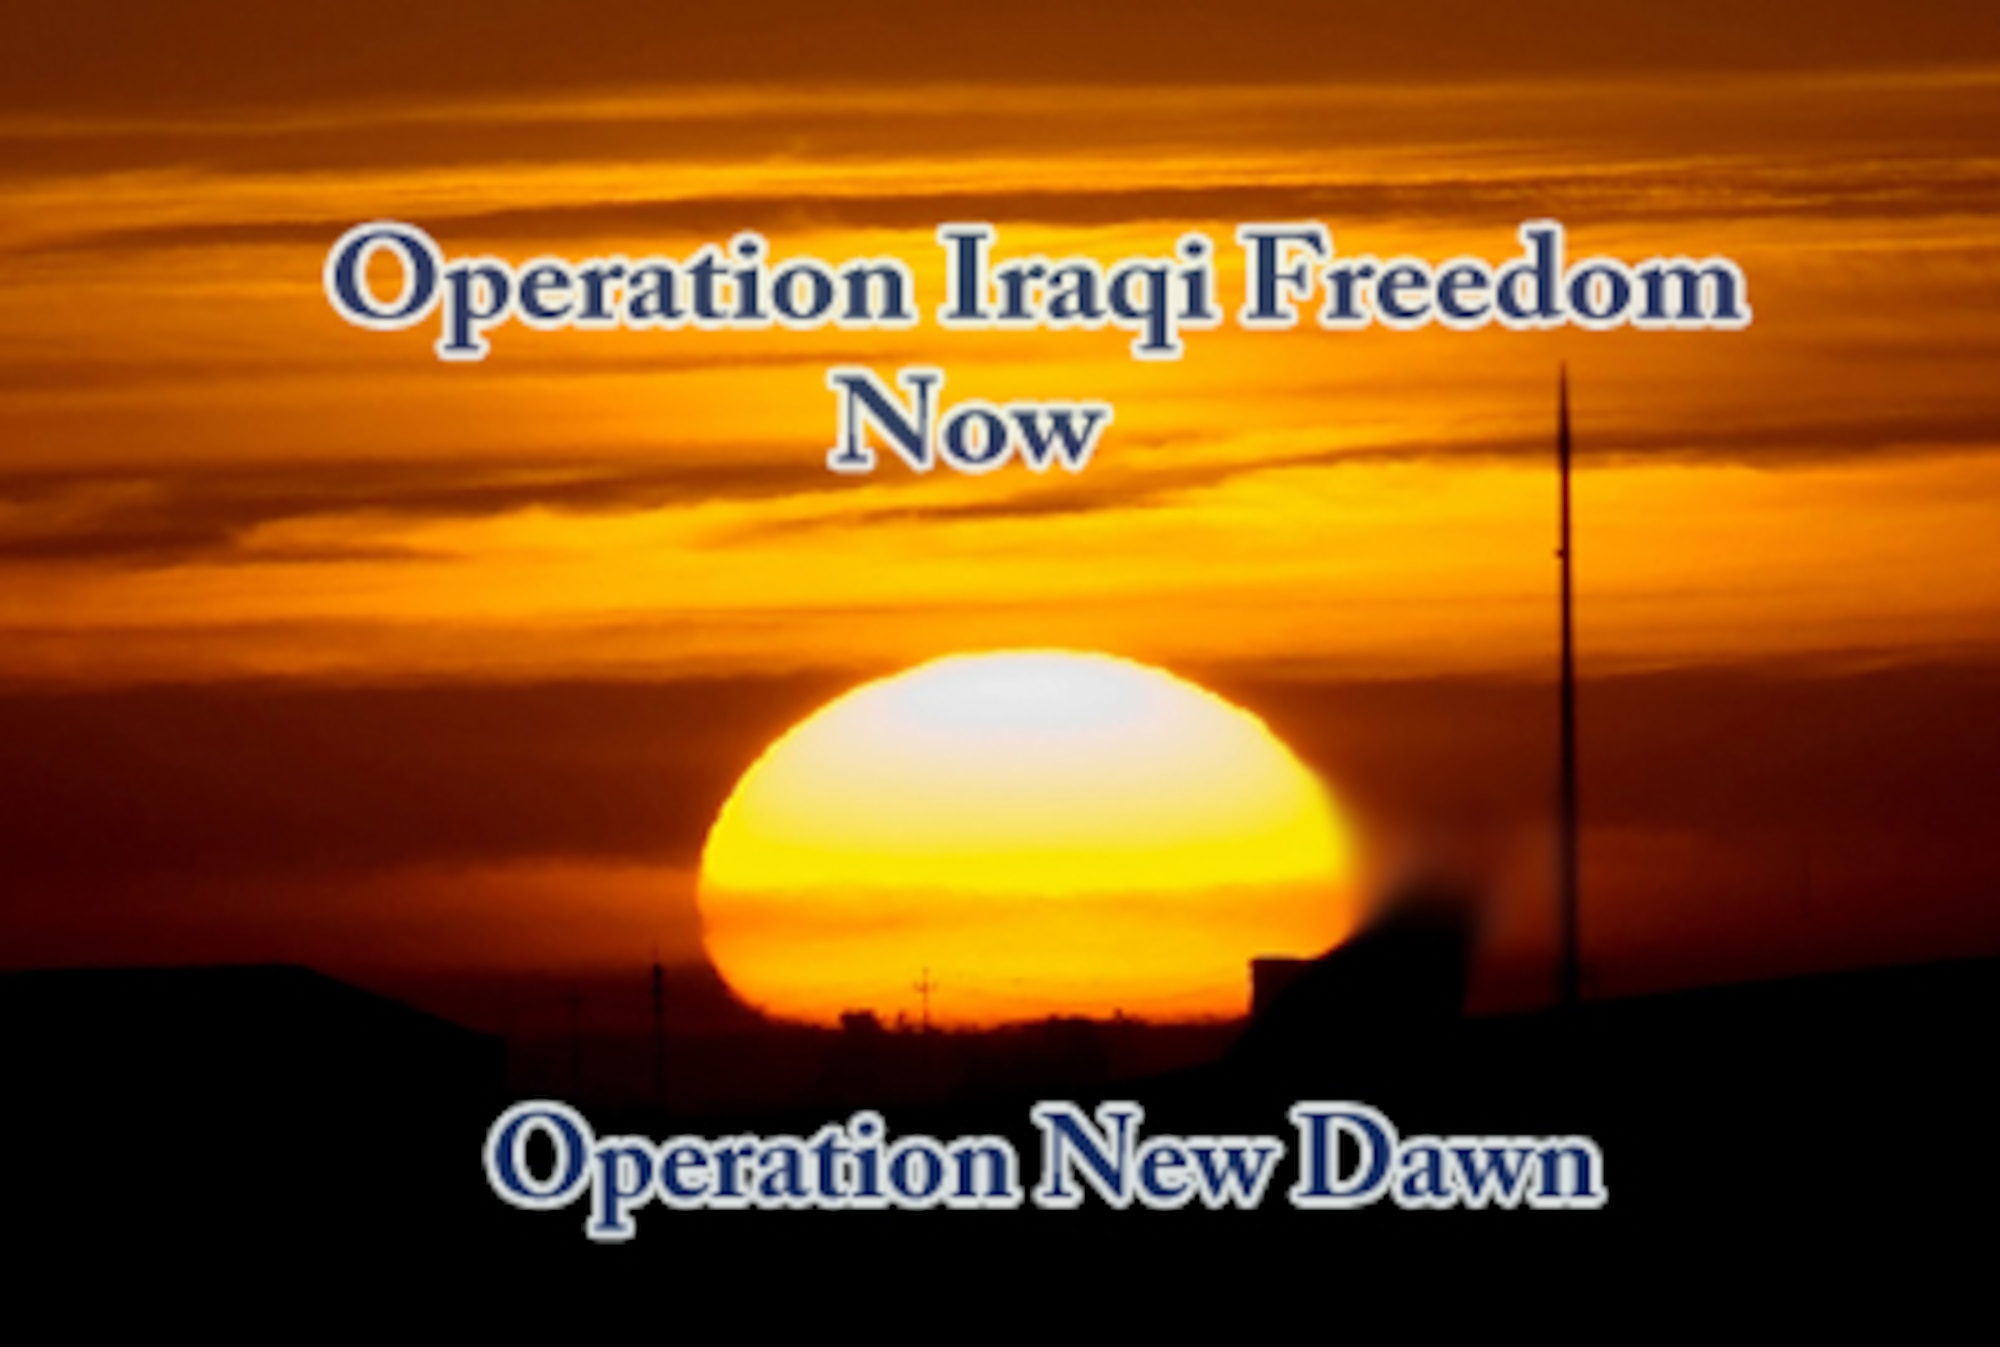 U.S. forces transition to Operation New Dawn > Air Force > Article Display